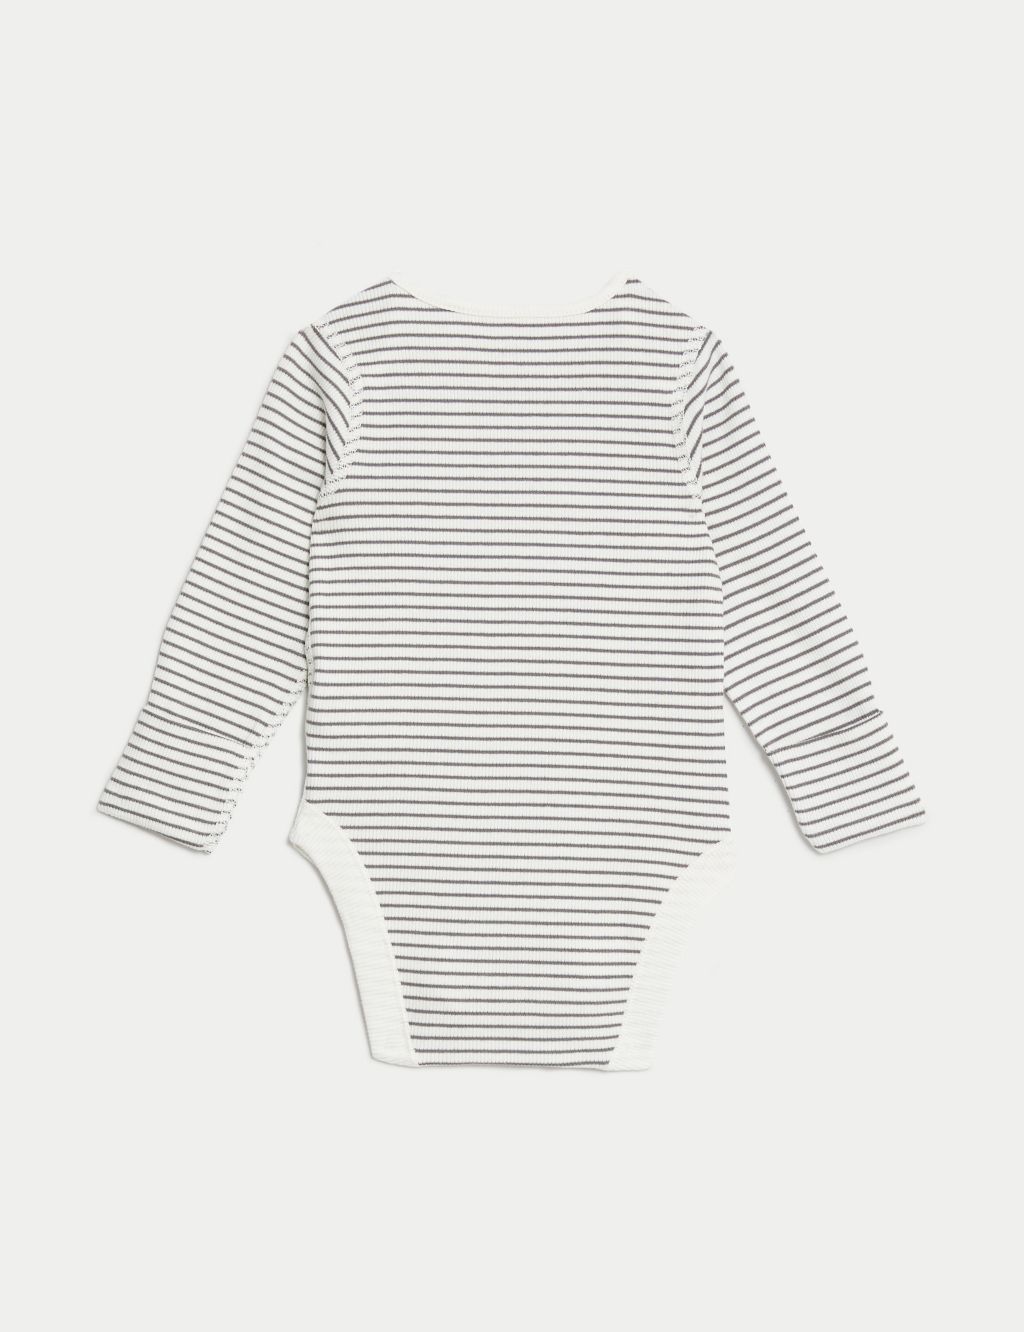 2pc Cotton Rich Striped Outfit (0-1 Yrs) image 4